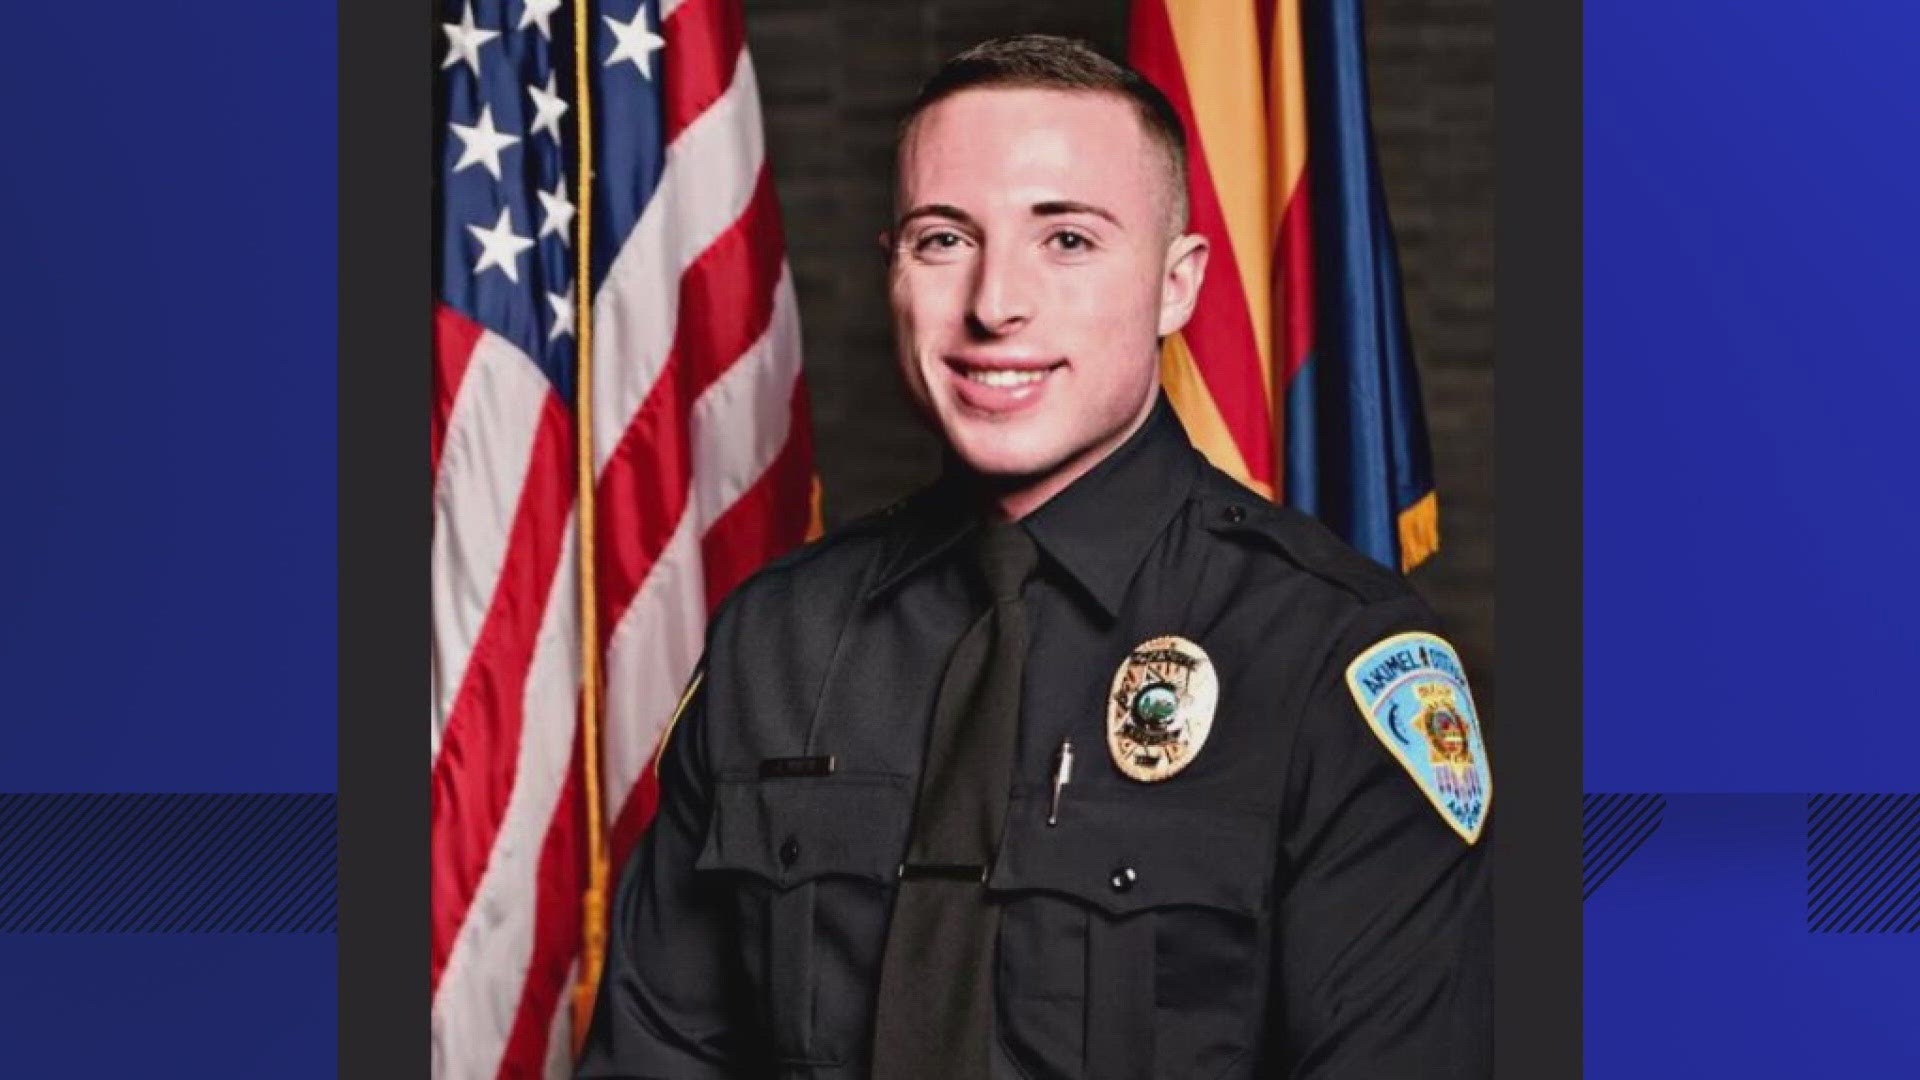 The police officer killed in the shooting was identified as Officer Joshua Briese.